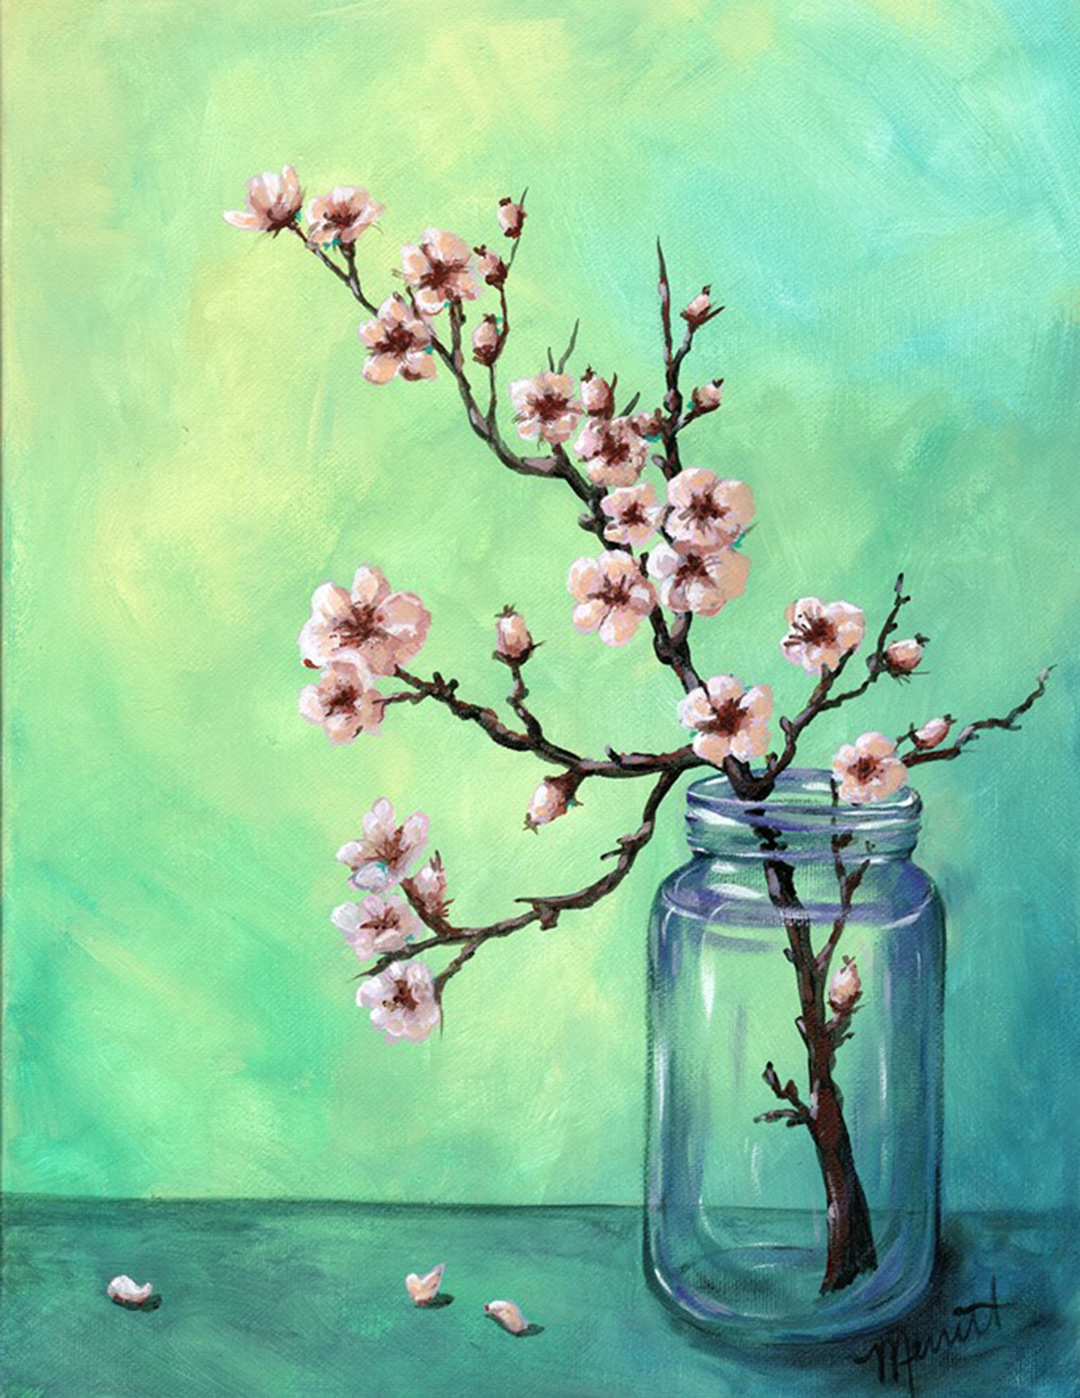 A mason jar of pink cherry blossoms against a teal and green wall and table.